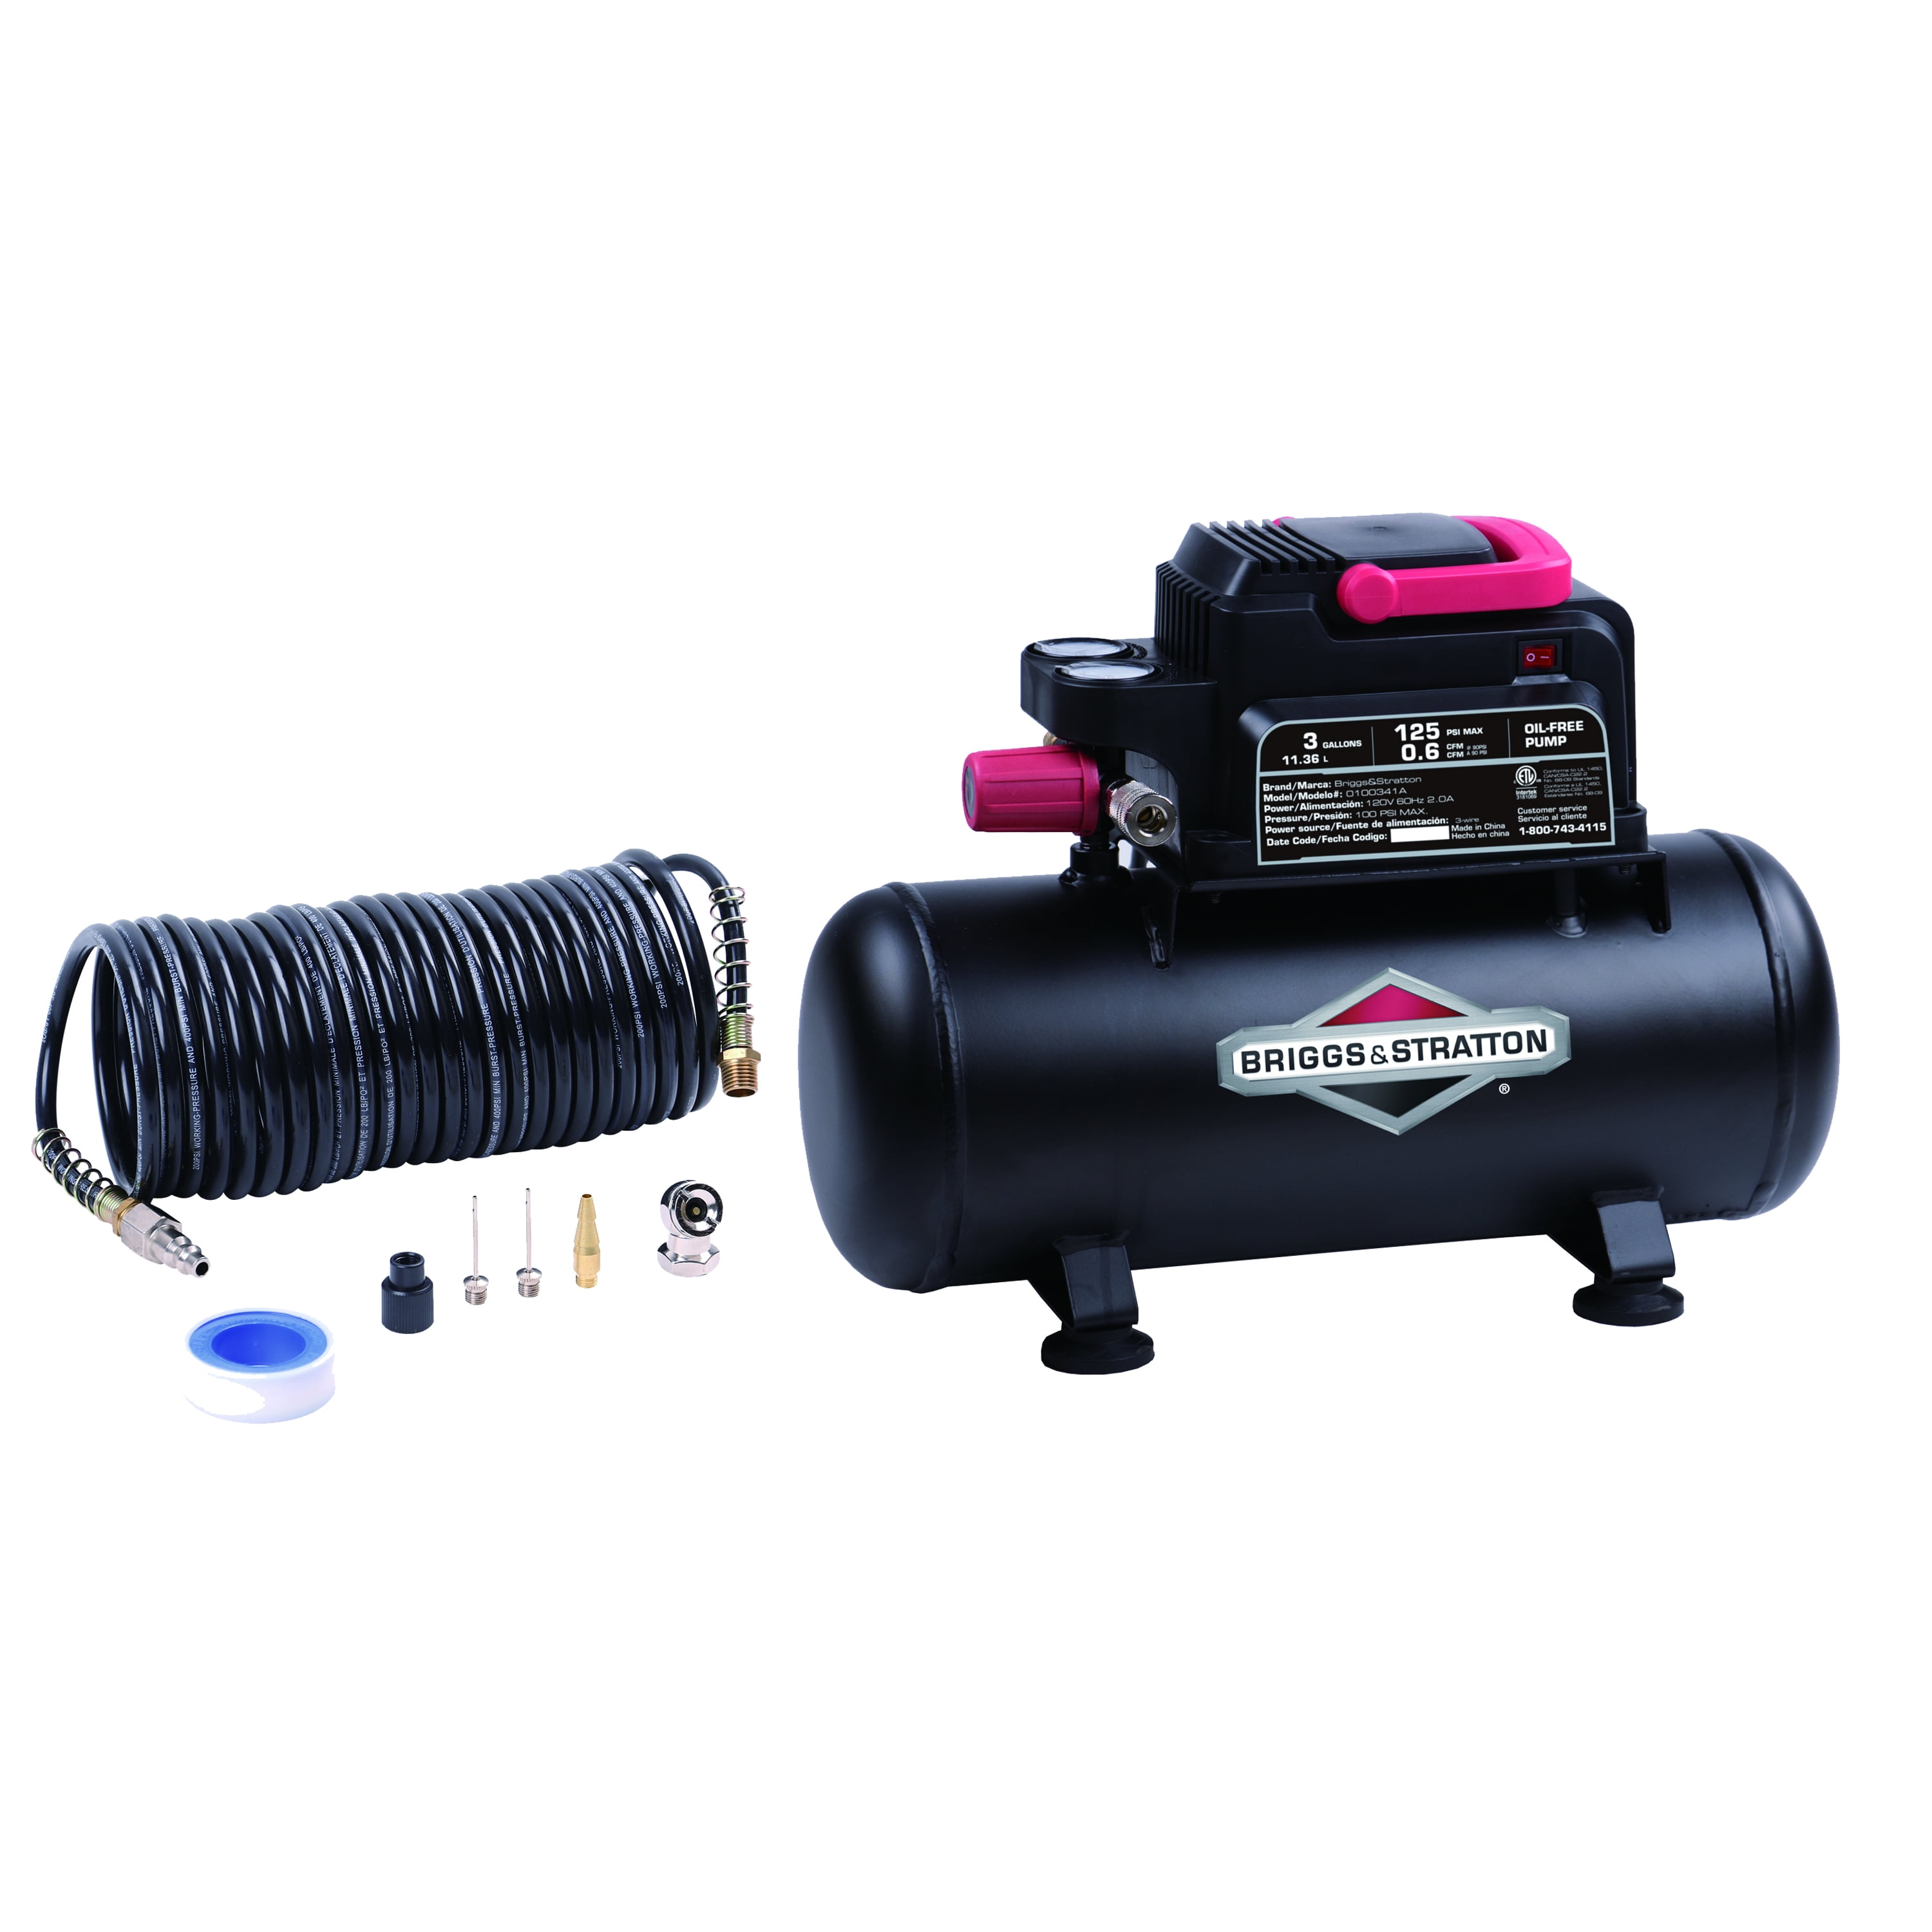 Small Air Compressor 3 Gallon Portable With Hose Kit Tank 125 PSI 120V Electric 